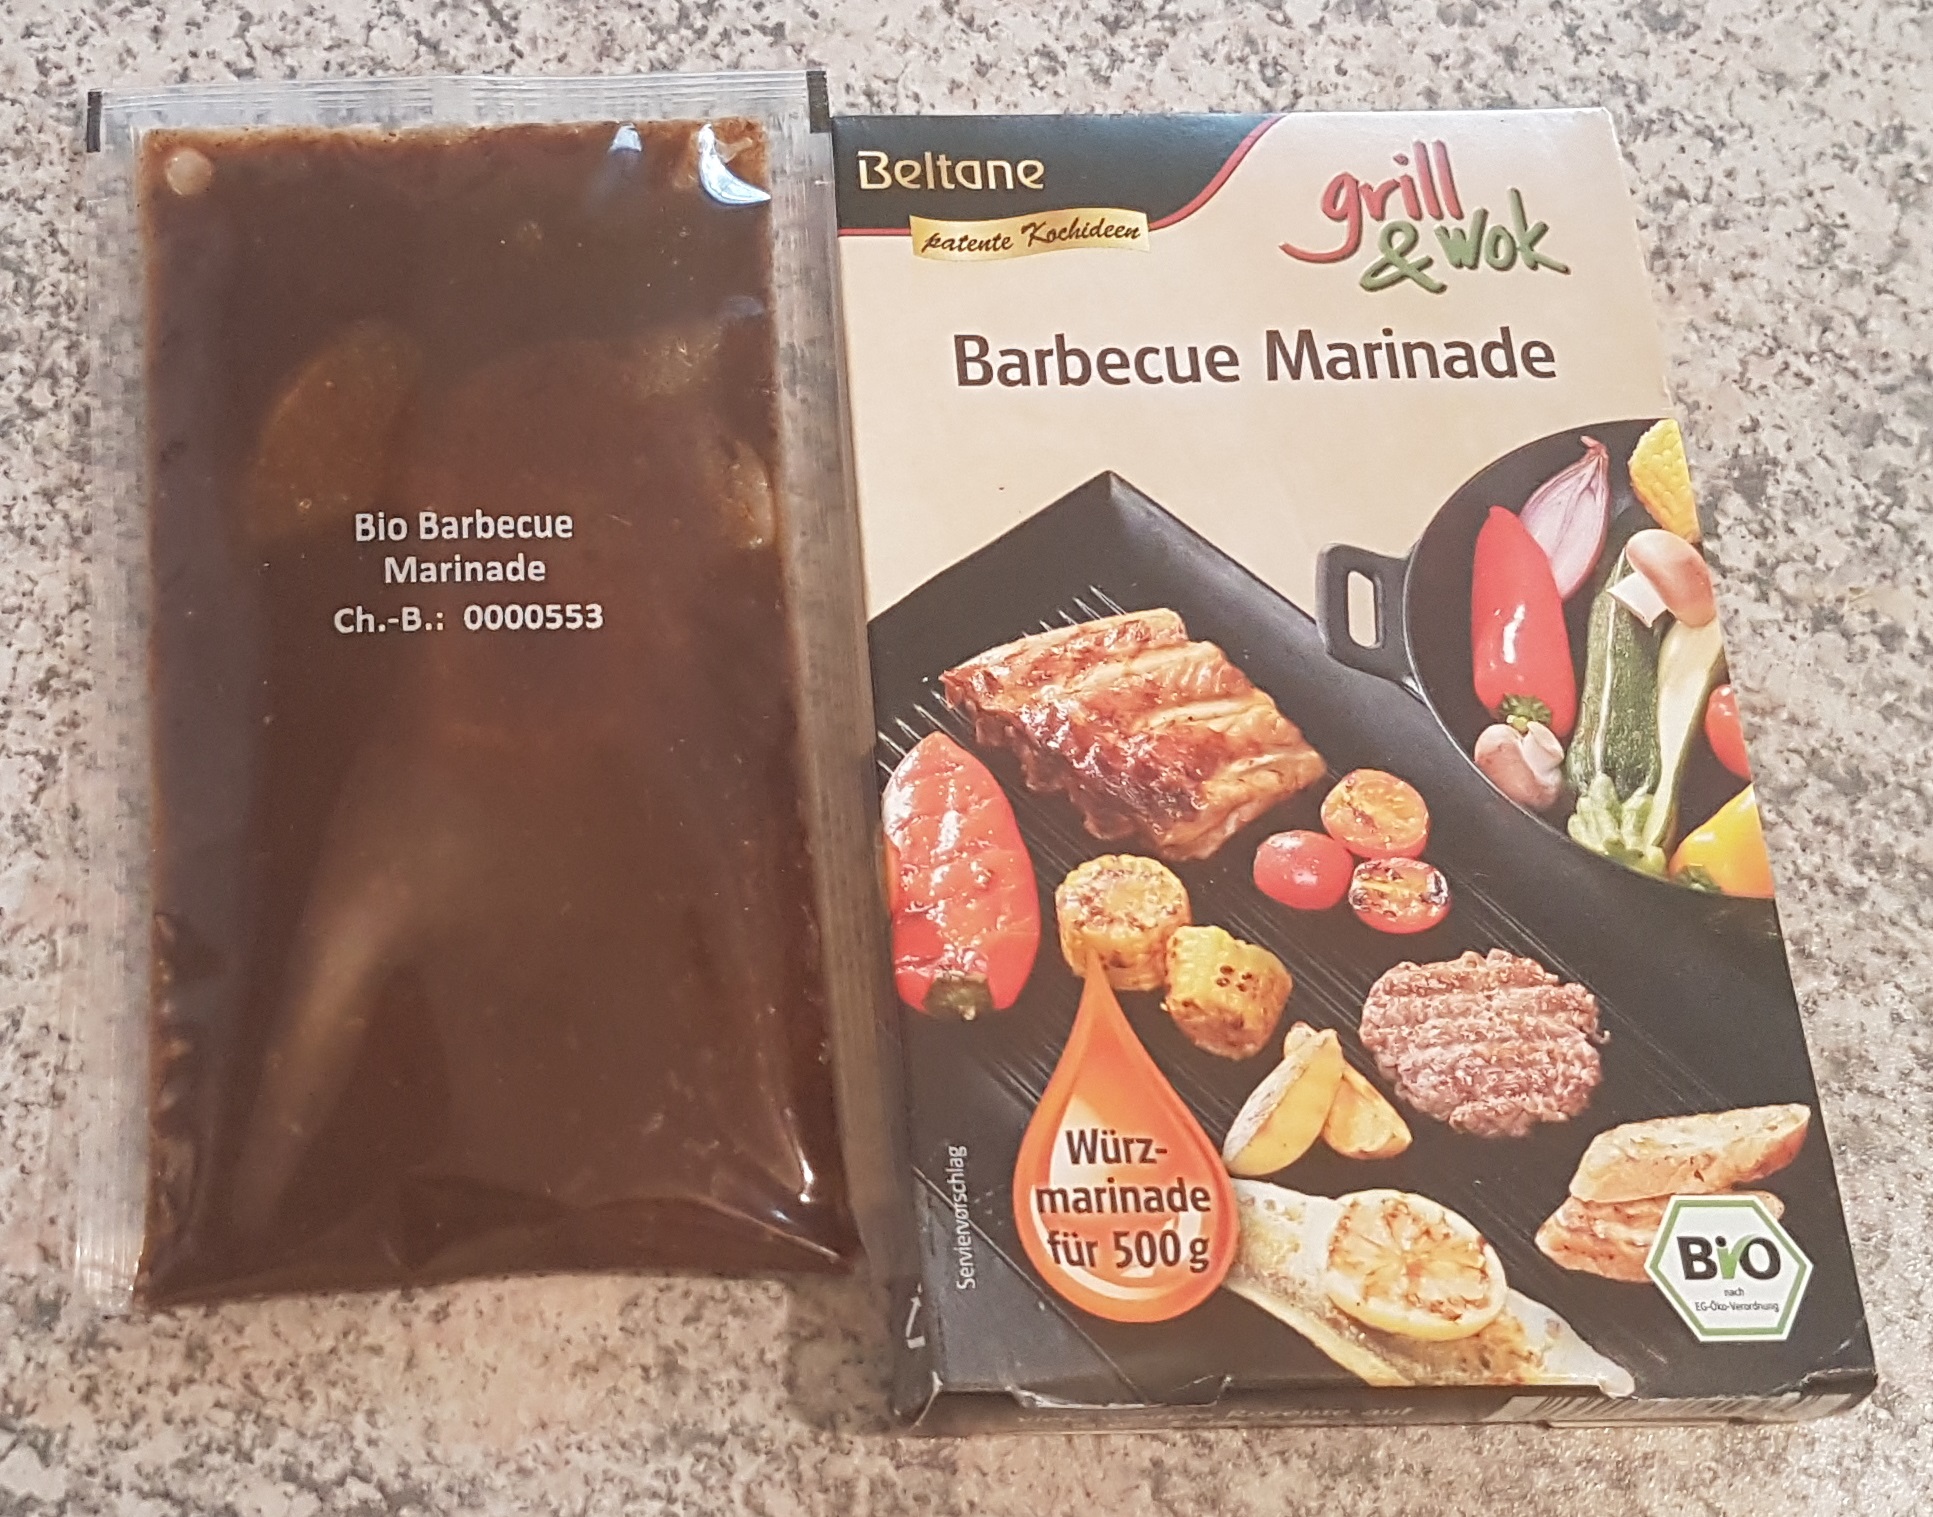 beltane-grill-wok-barbecue-marinade